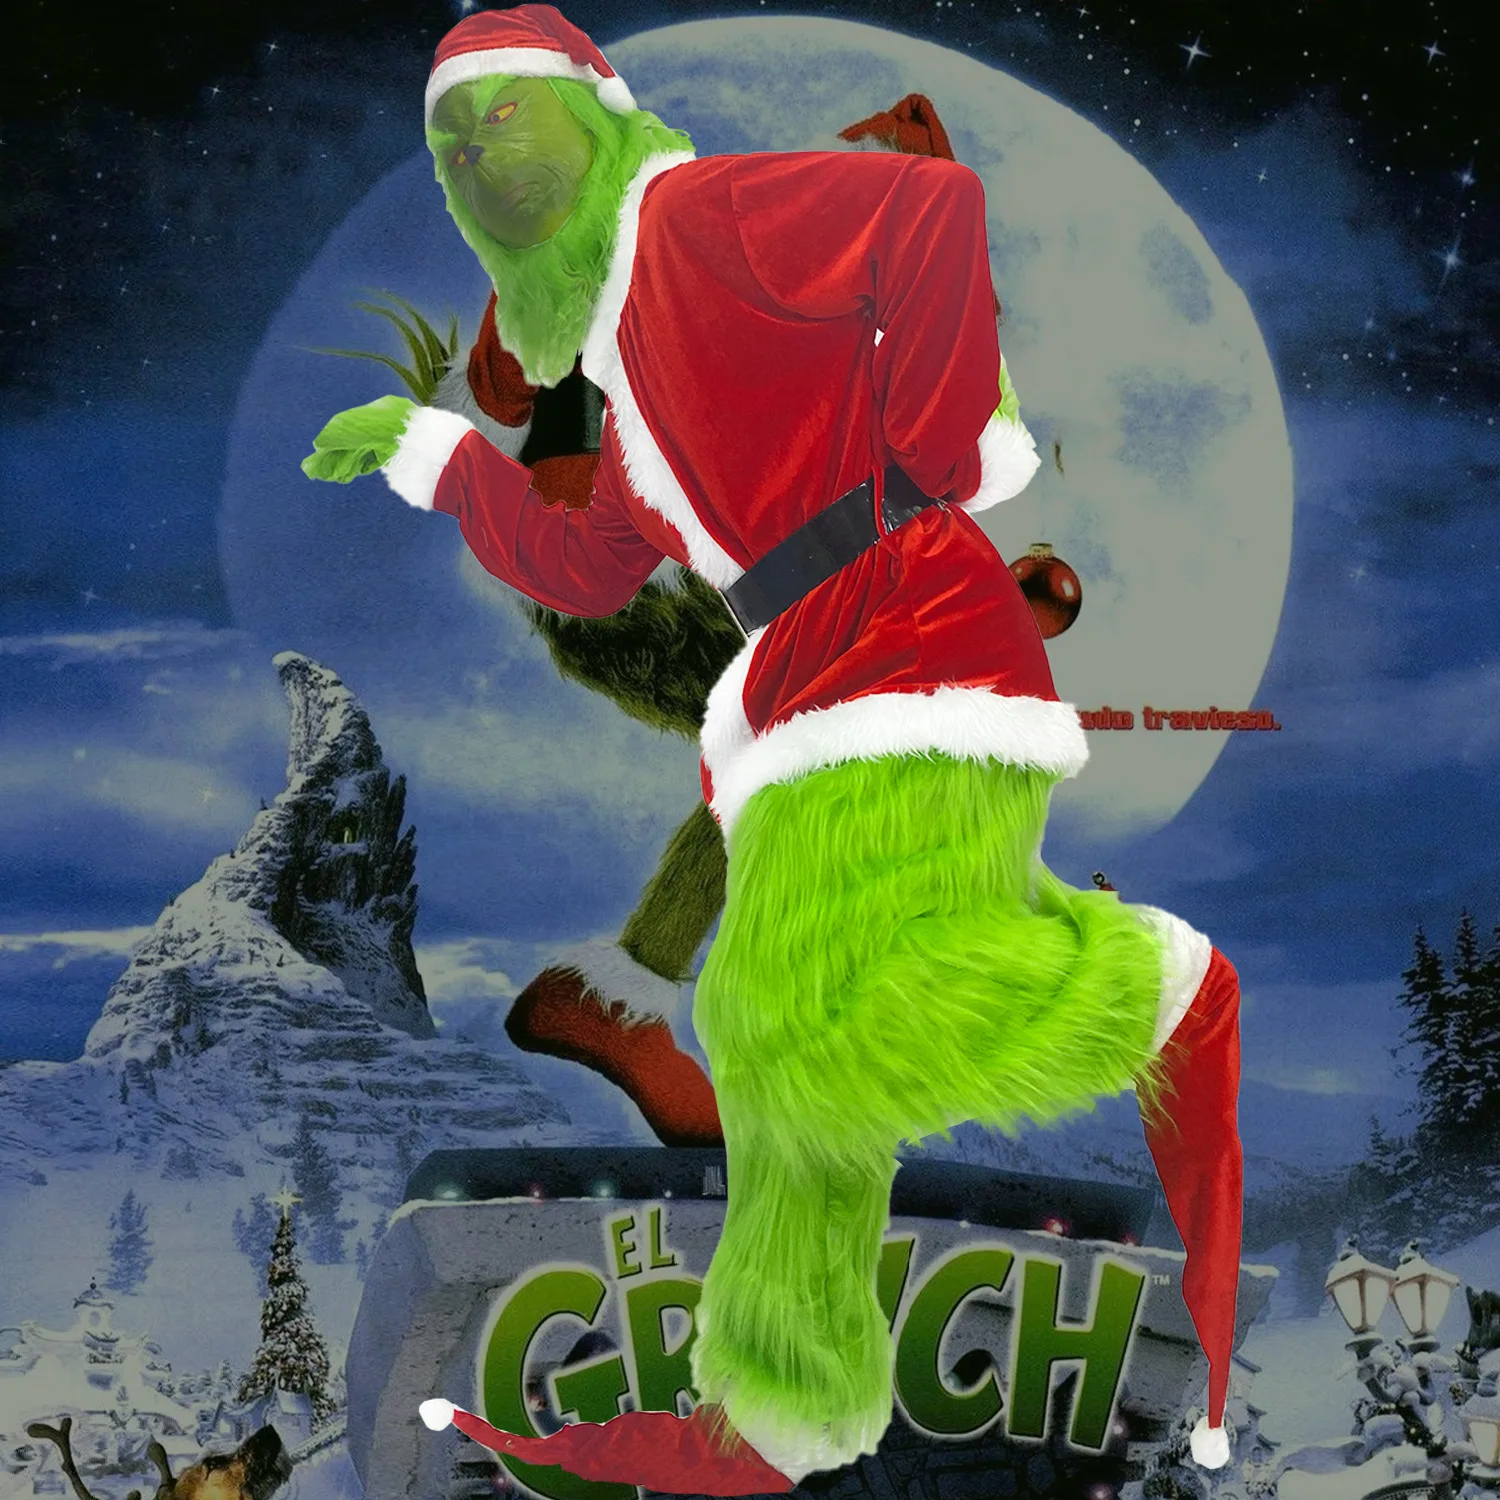 

Christmas Geek Thief Green Fur Monster Santa Claus Costume Set Suit Props Belt Gloves Mask Hat Christmas Explosion Party Costume